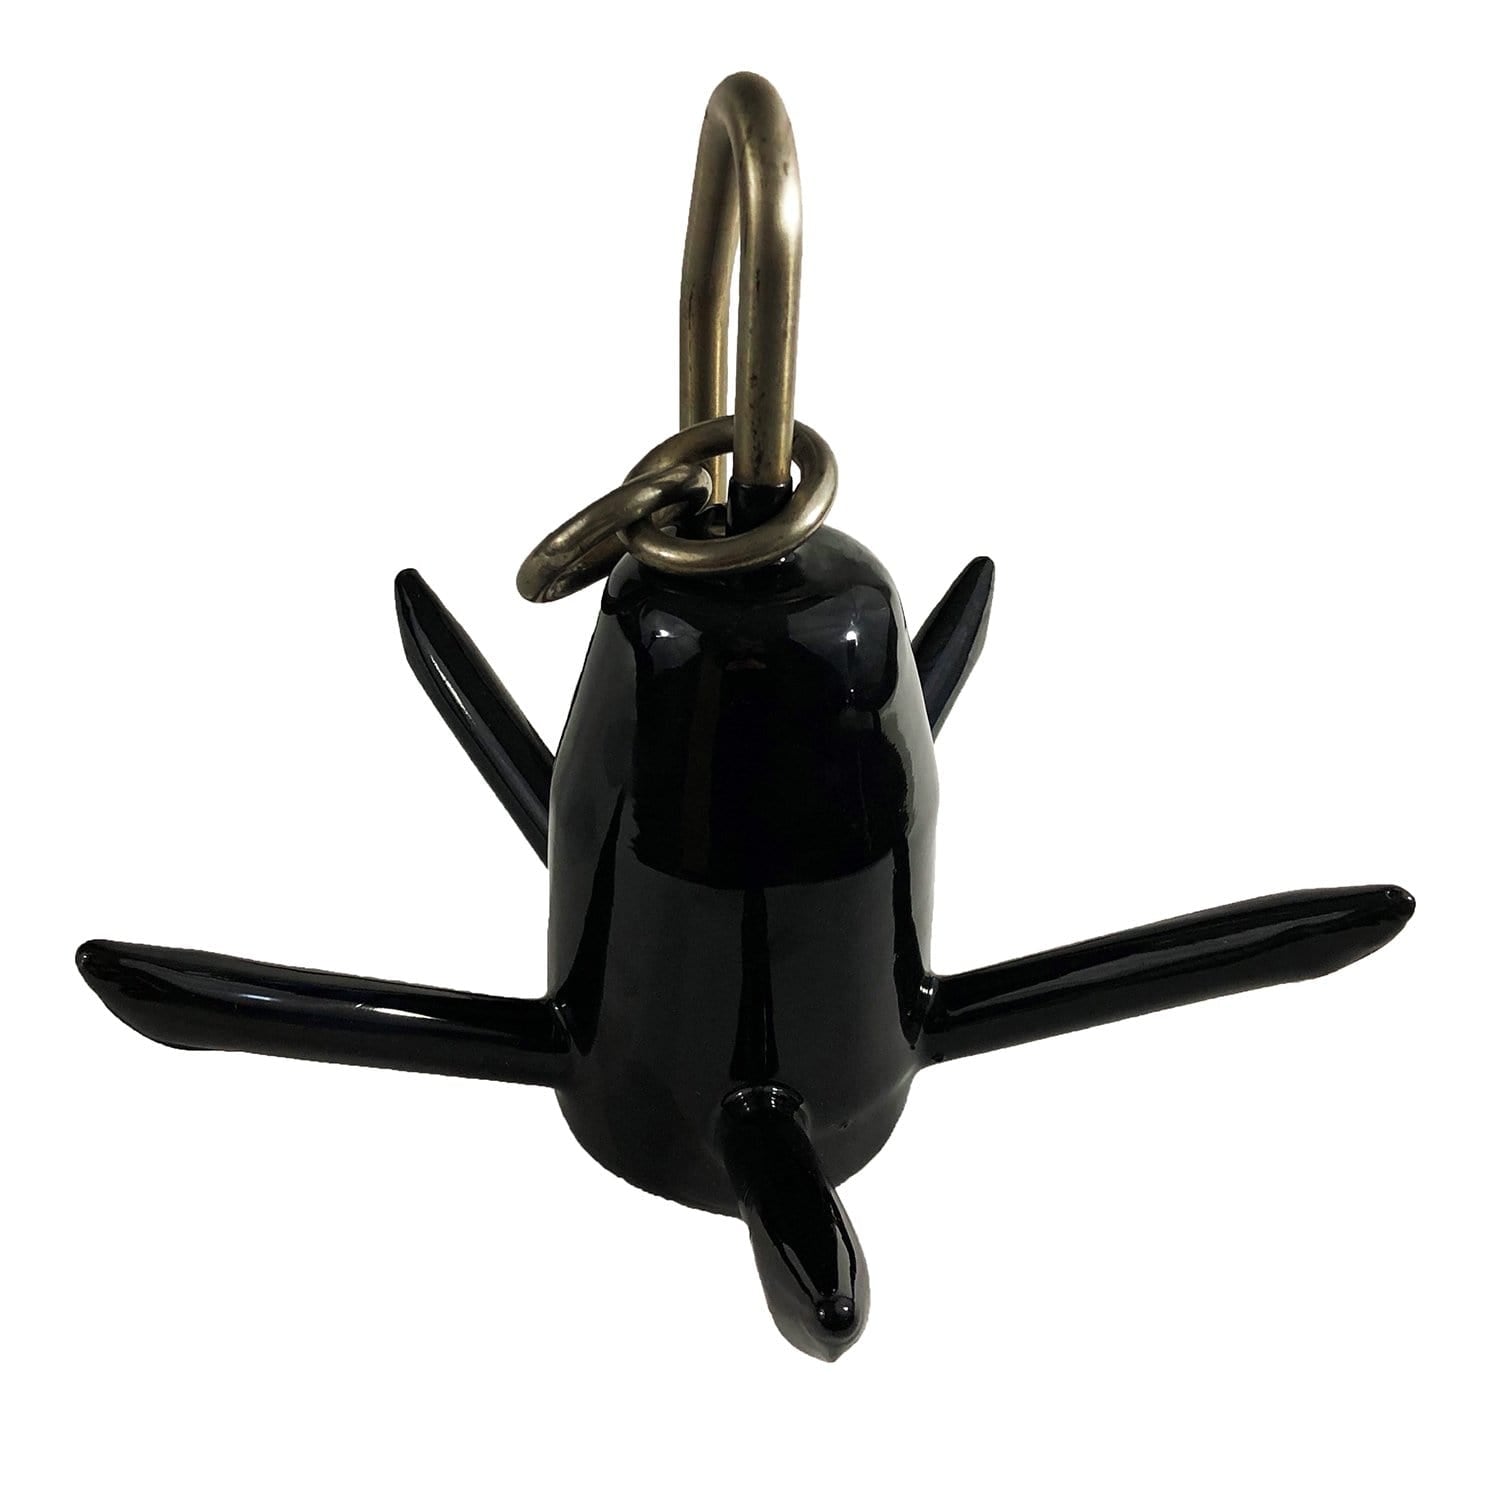 Greenfield 614-B - 14 lb Black Painted Iron Richter Anchor